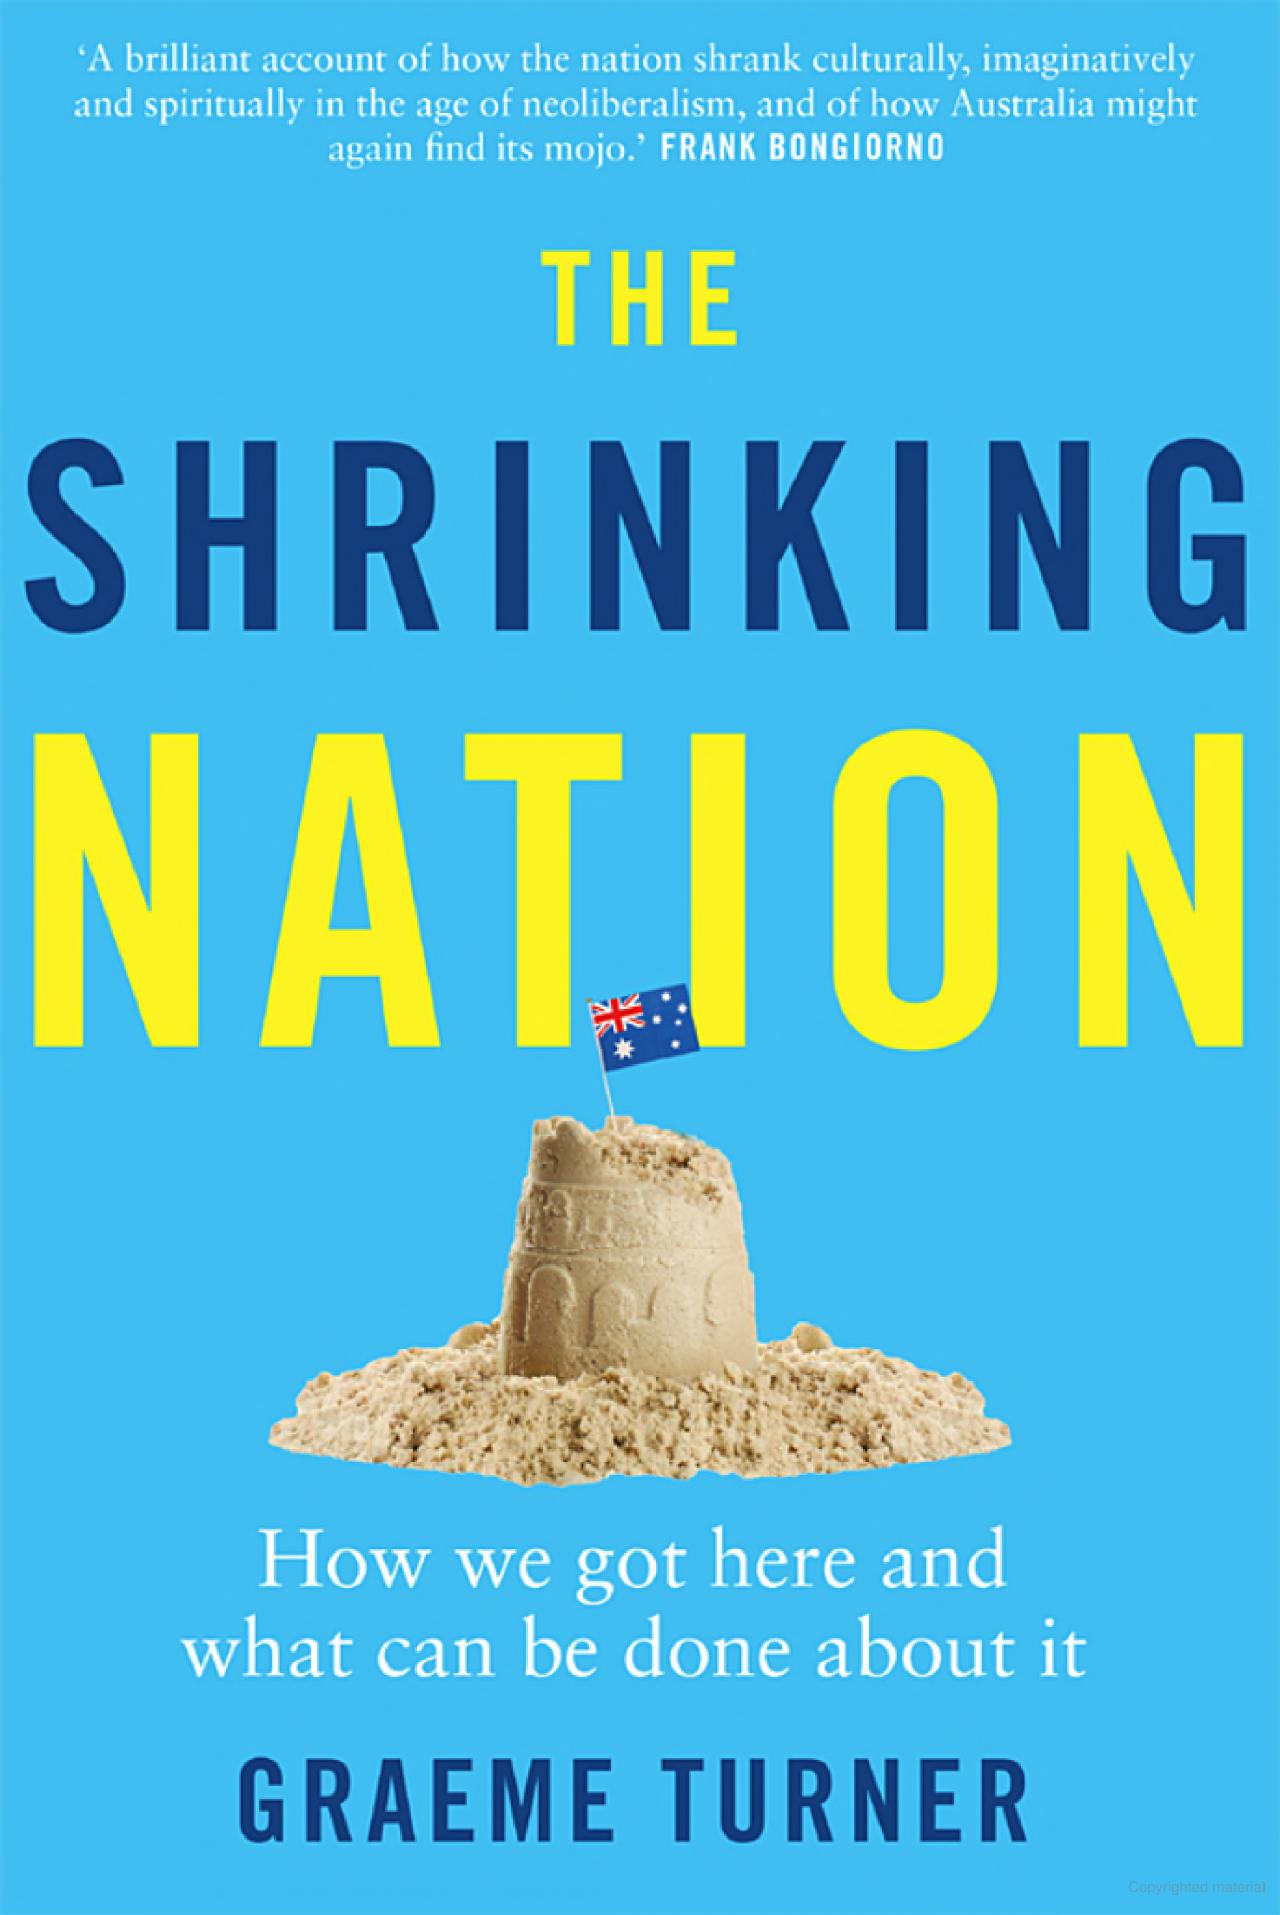 The cover of The Shrinking Nation by Graeme Turner which has a bright blue background and features a sand castle with an Australian flag on the top. 